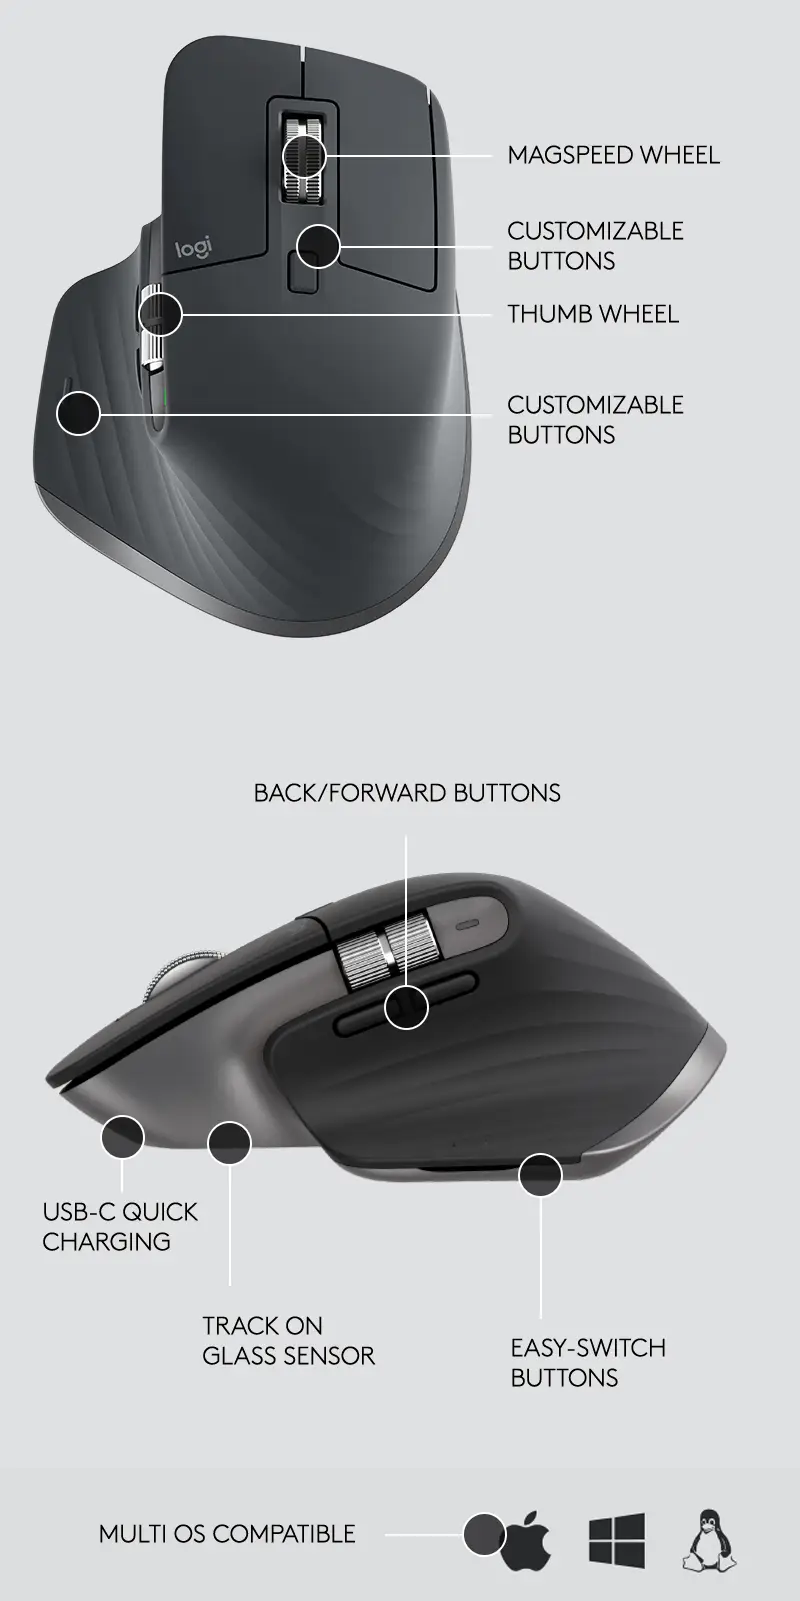 MX Master 3 - Advanced wireless mouse - Tutorial on app specific settings 